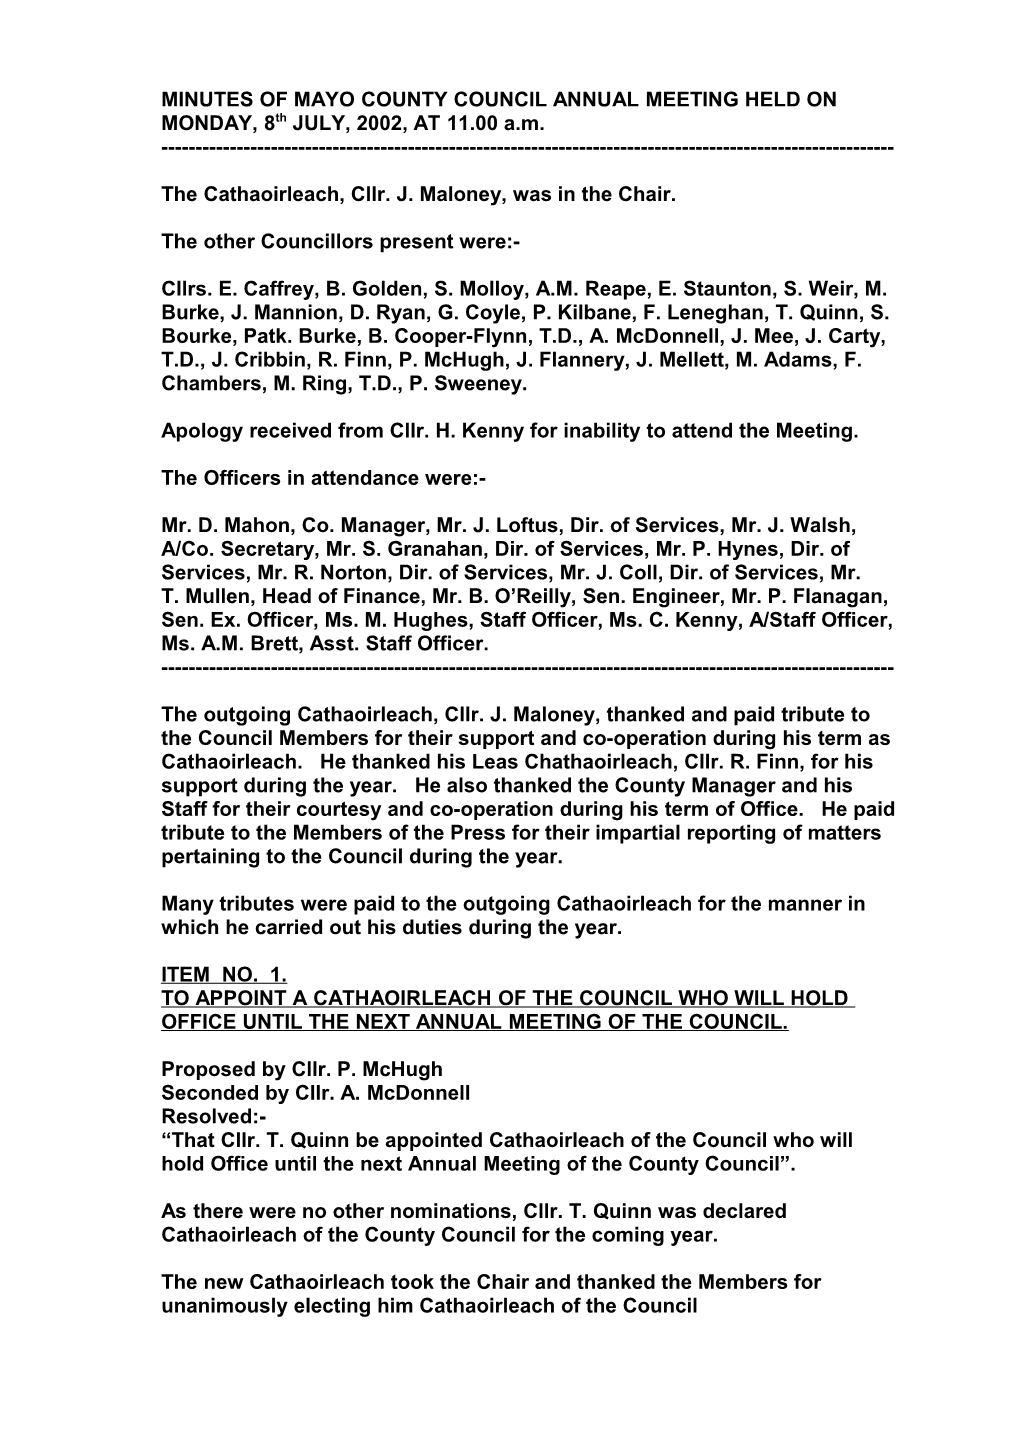 MINUTES of MAYO COUNTY COUNCIL ANNUAL MEETING HELD on MONDAY, 8Th JULY, 2002, at 11